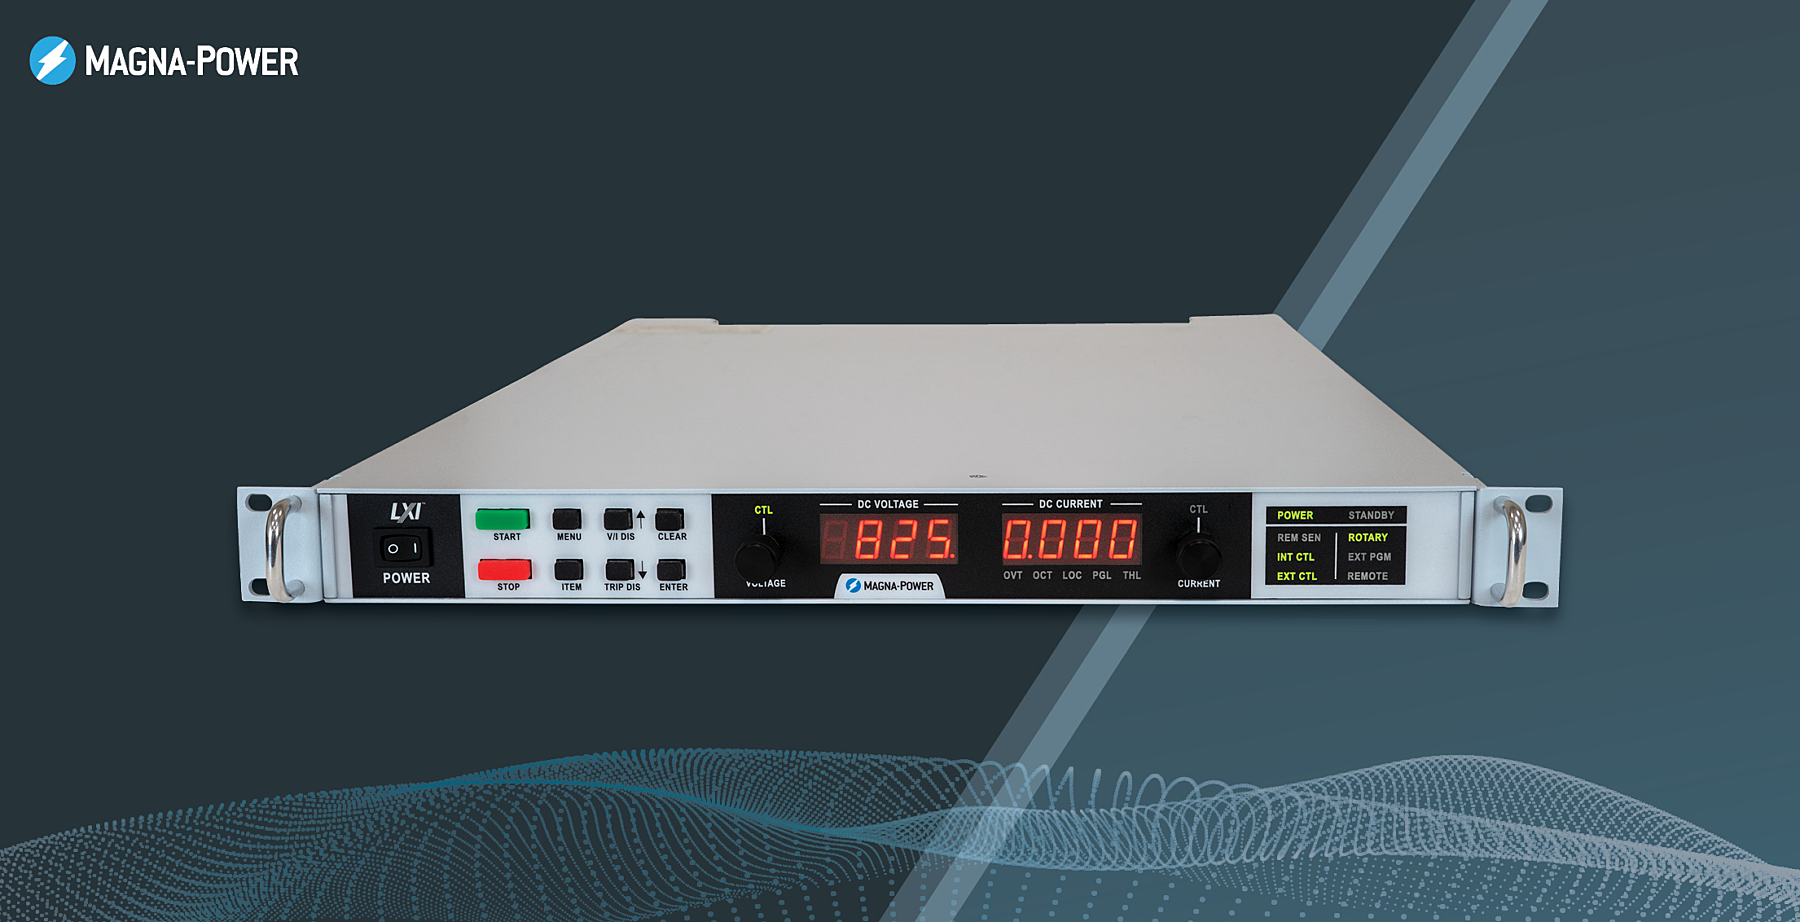 SL Series MagnaDC programmable DC power supply, now 10 kW in 1U.